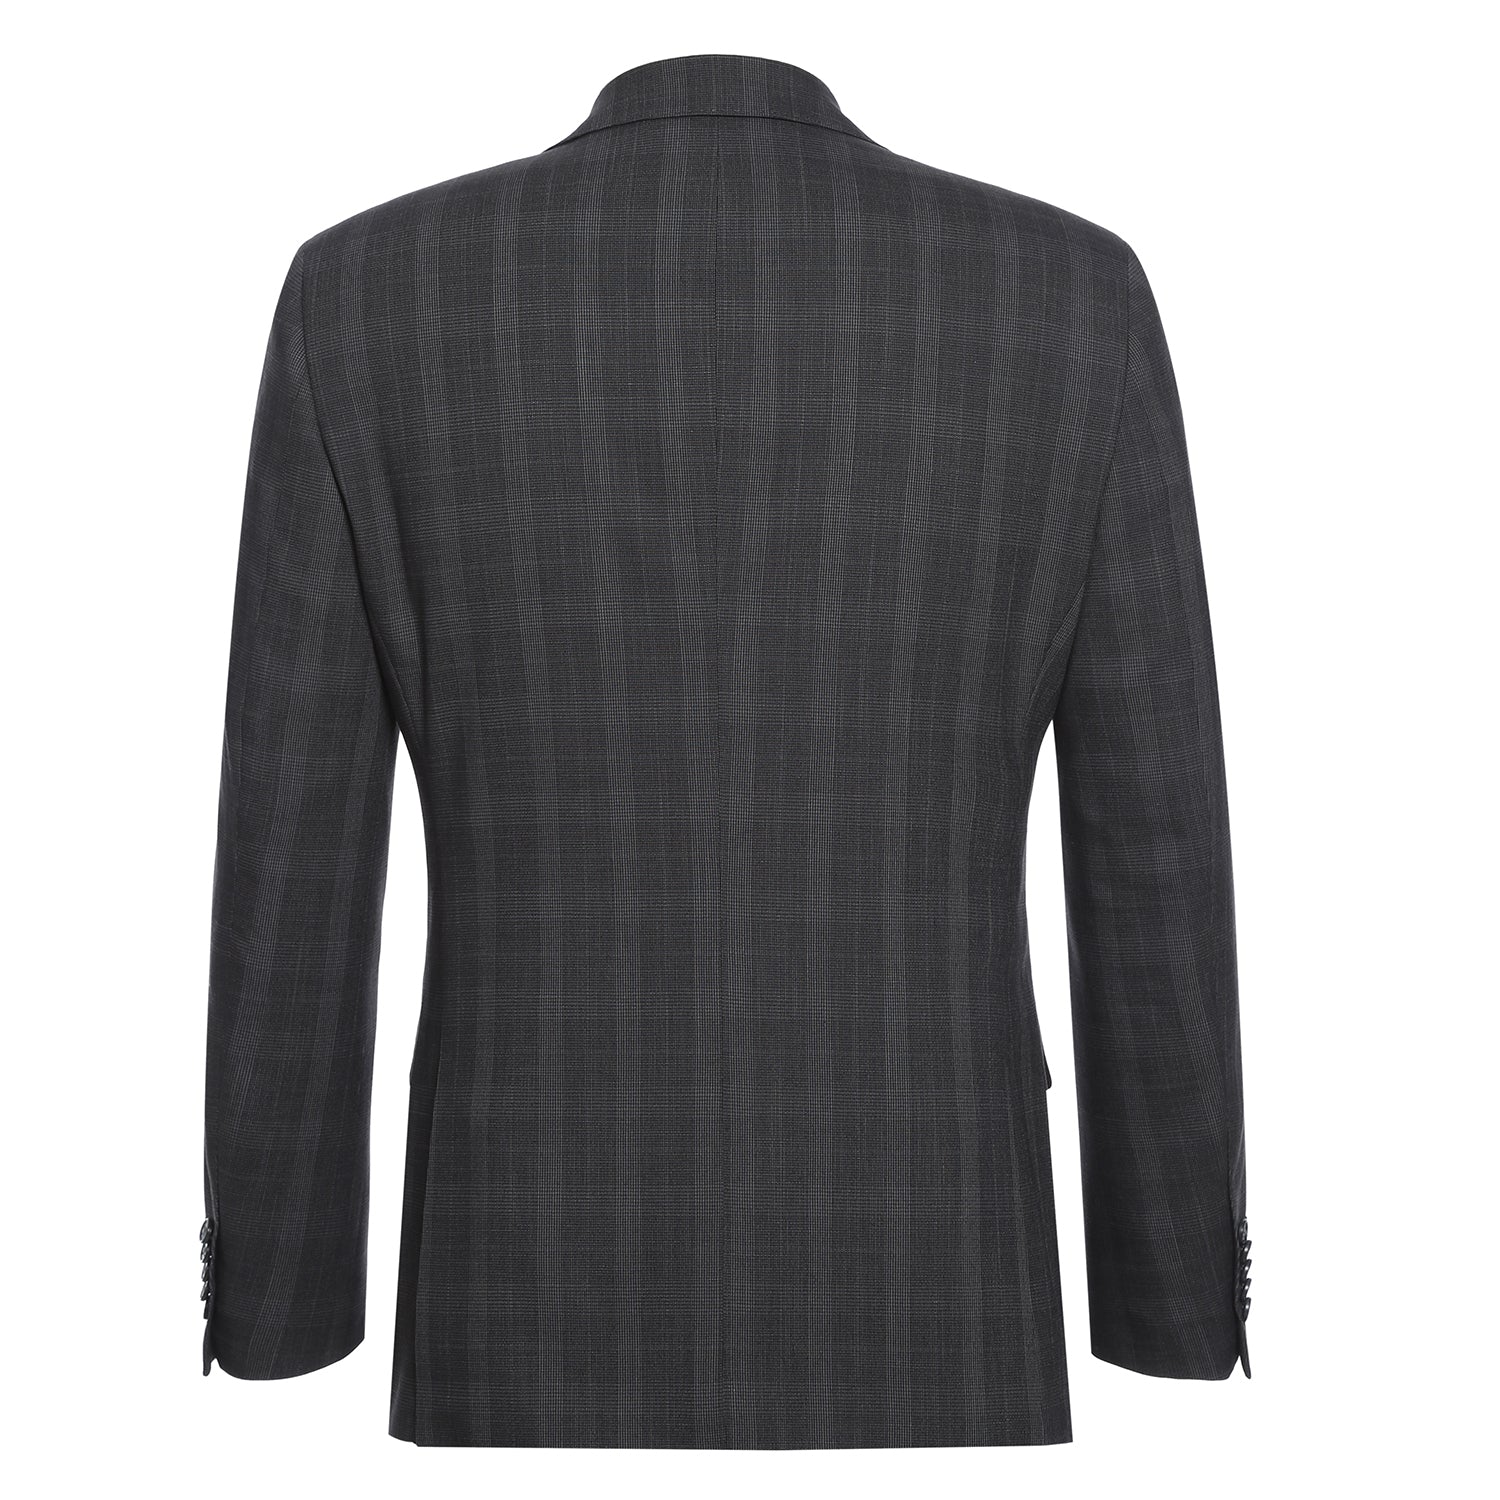 Stretch Performance Single Breasted SLIM FIT Suit in Charcoal Plaid (Short, Regular, and Long Available) by English Laundry